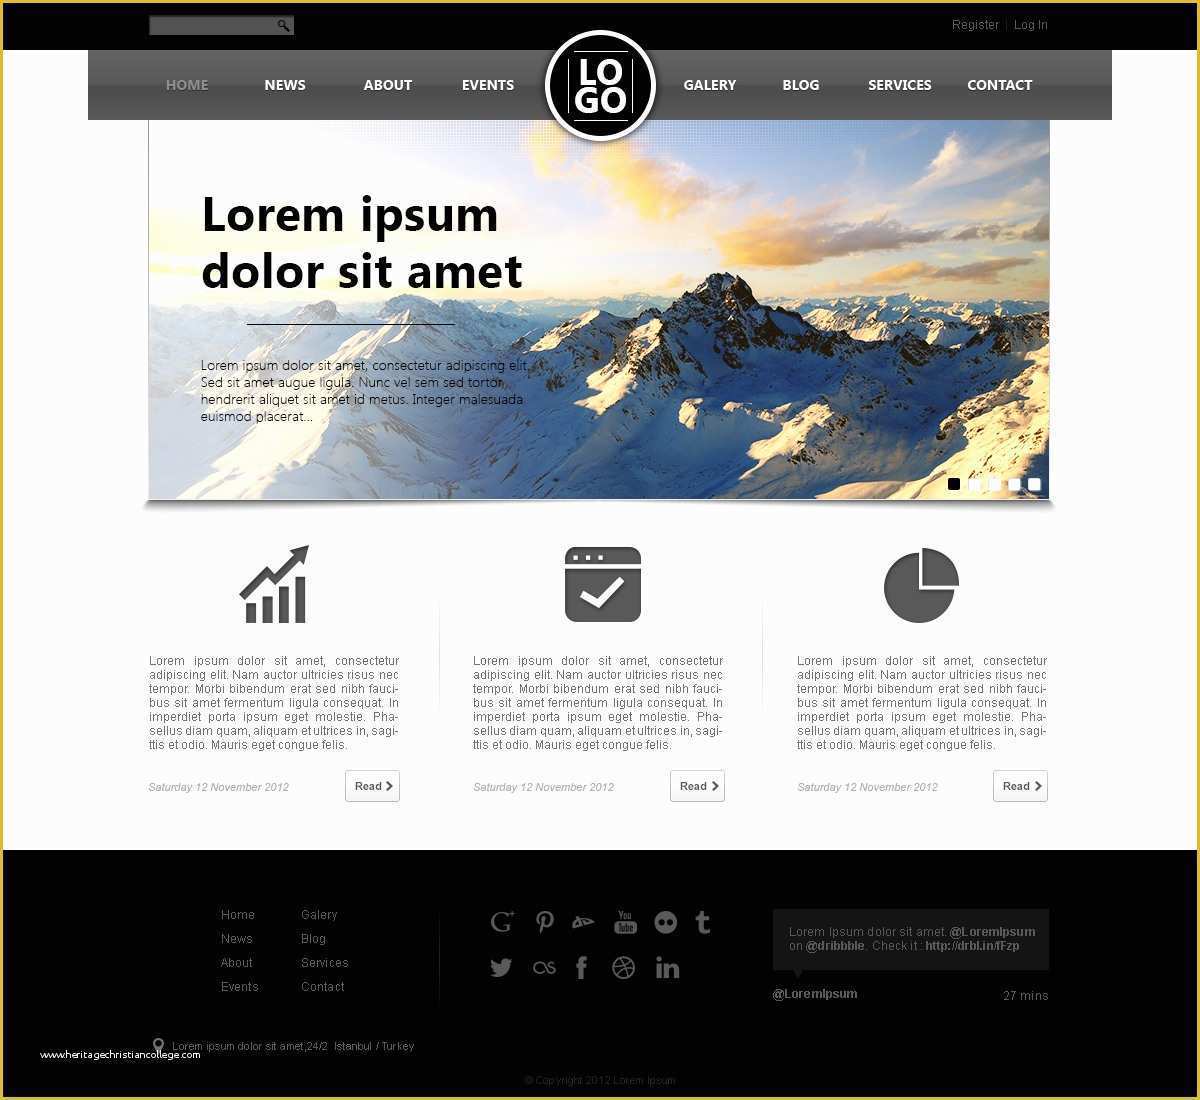 Web Design Templates Psd Free Download Of Well Designed Psd Website Templates for Free Download